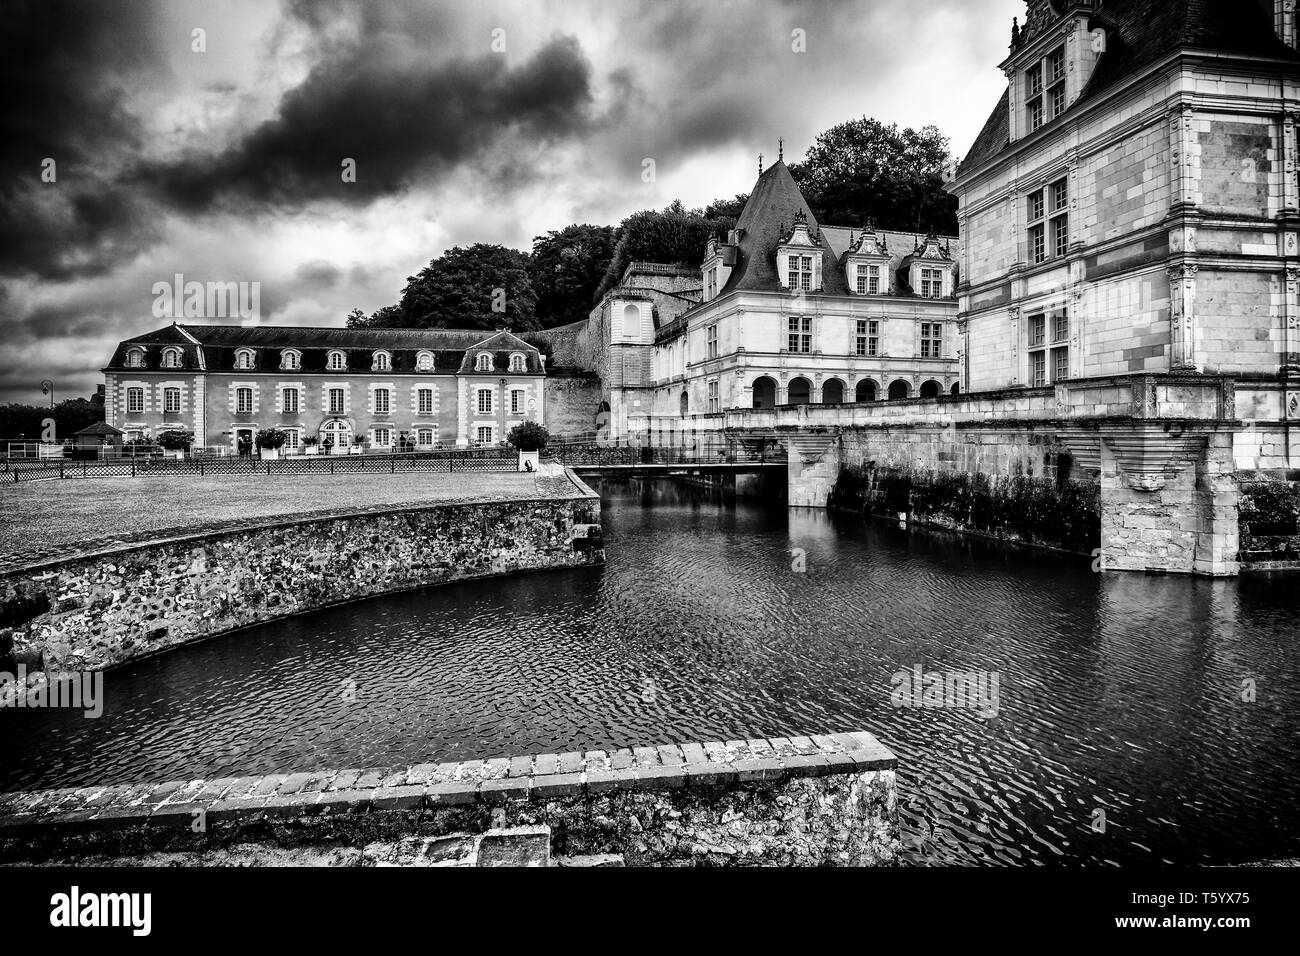 Black and white photo of Villandry castle and its' gardens in France. Amazing Chateau de Villandry of Loire Valley, Indre-et-Loire region in France Stock Photo